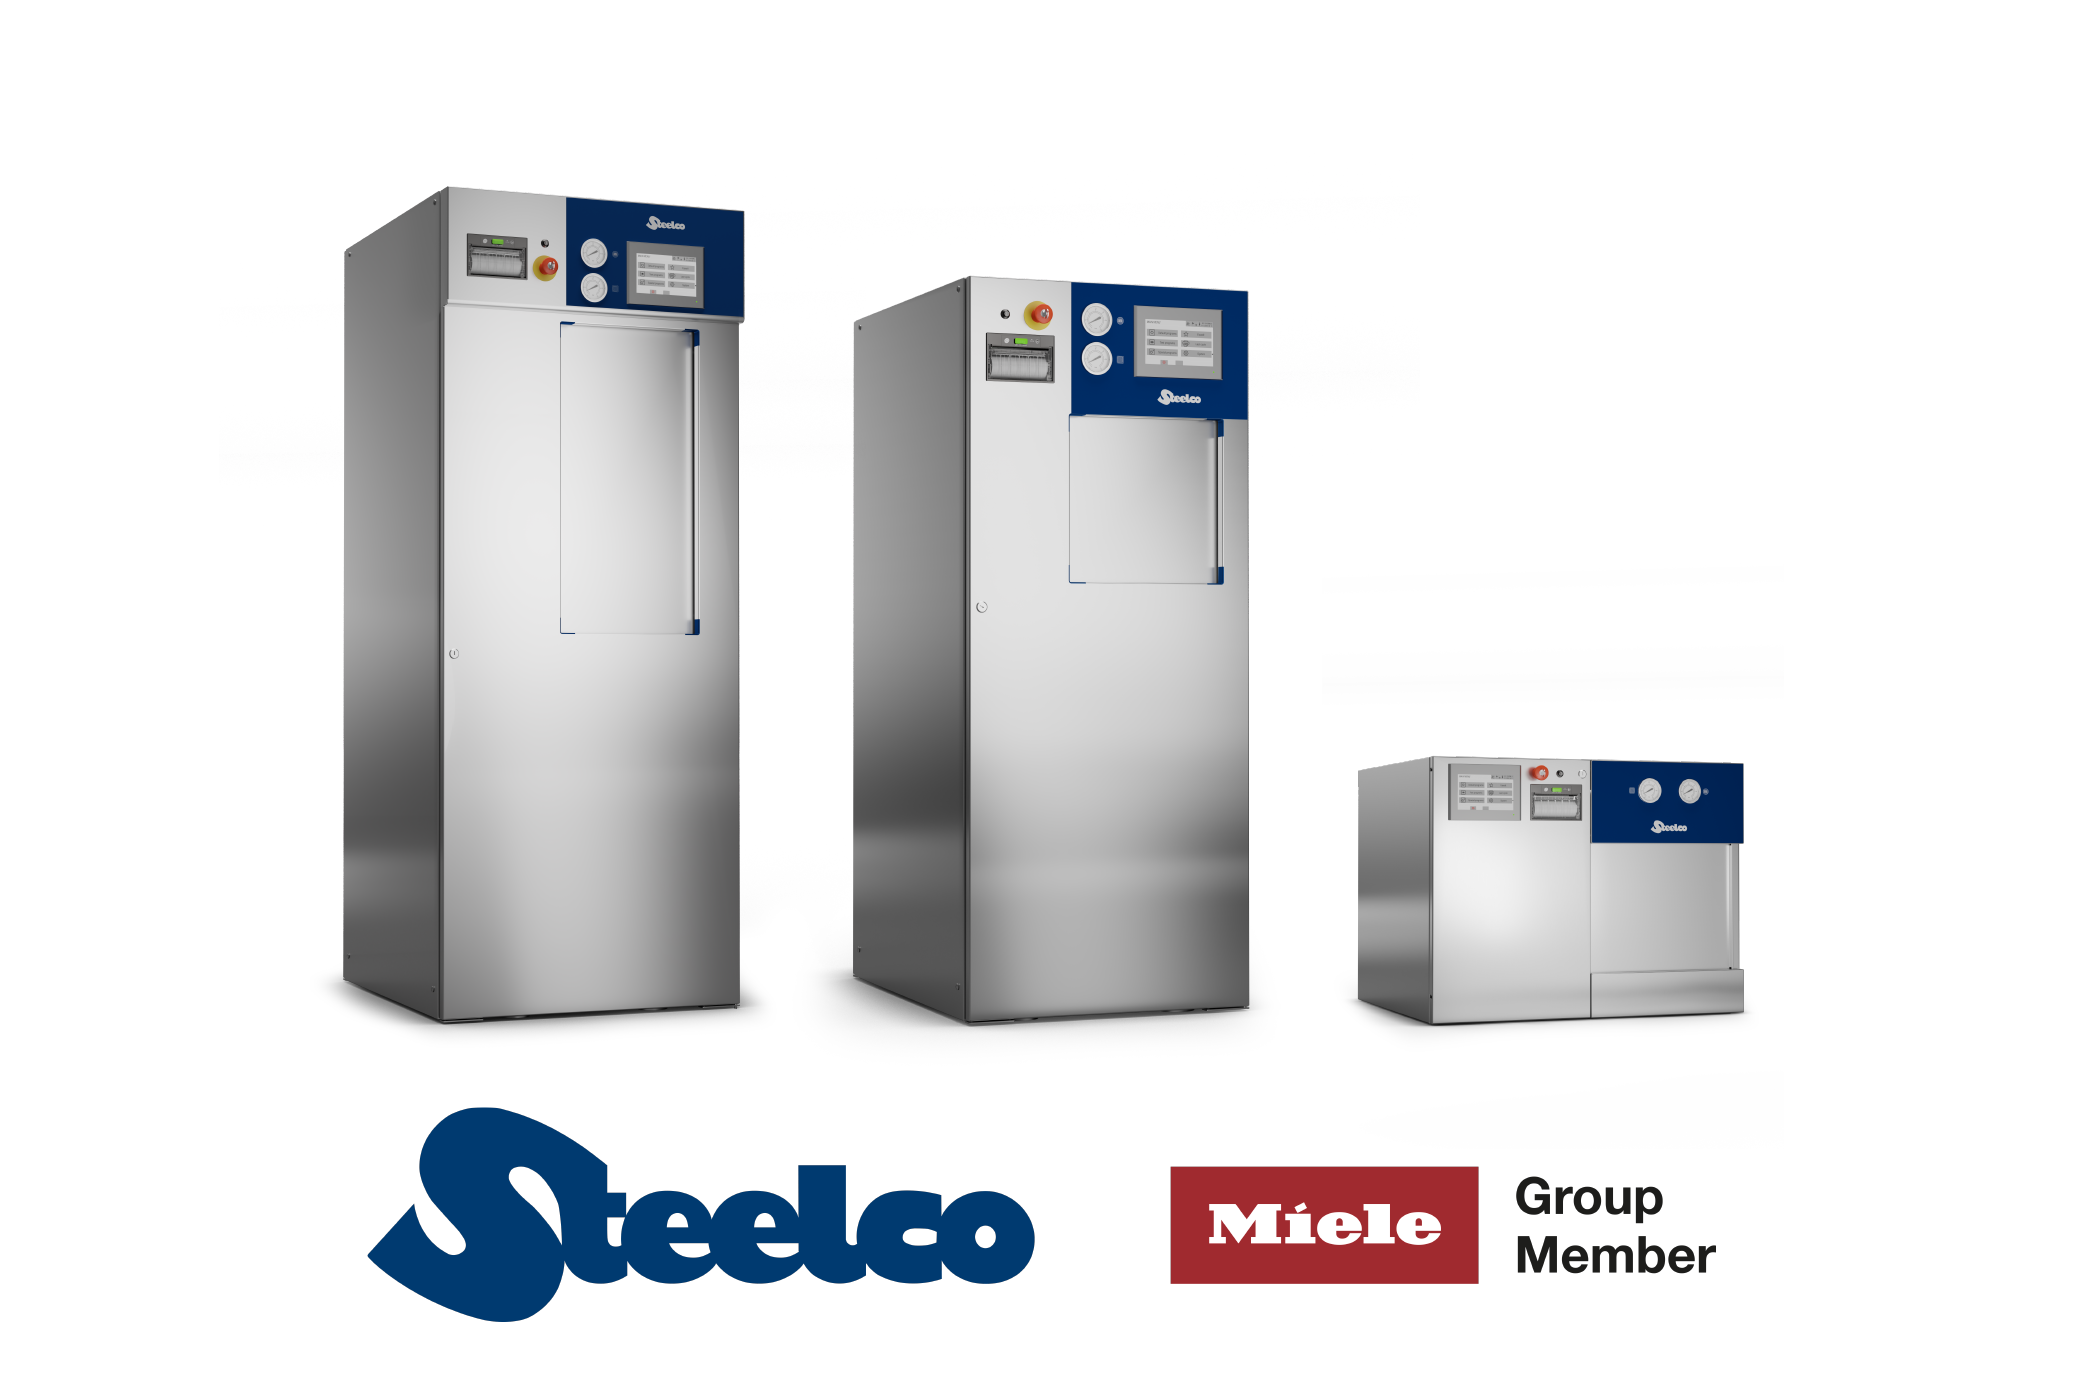 Steelco small healthcare autoclaves